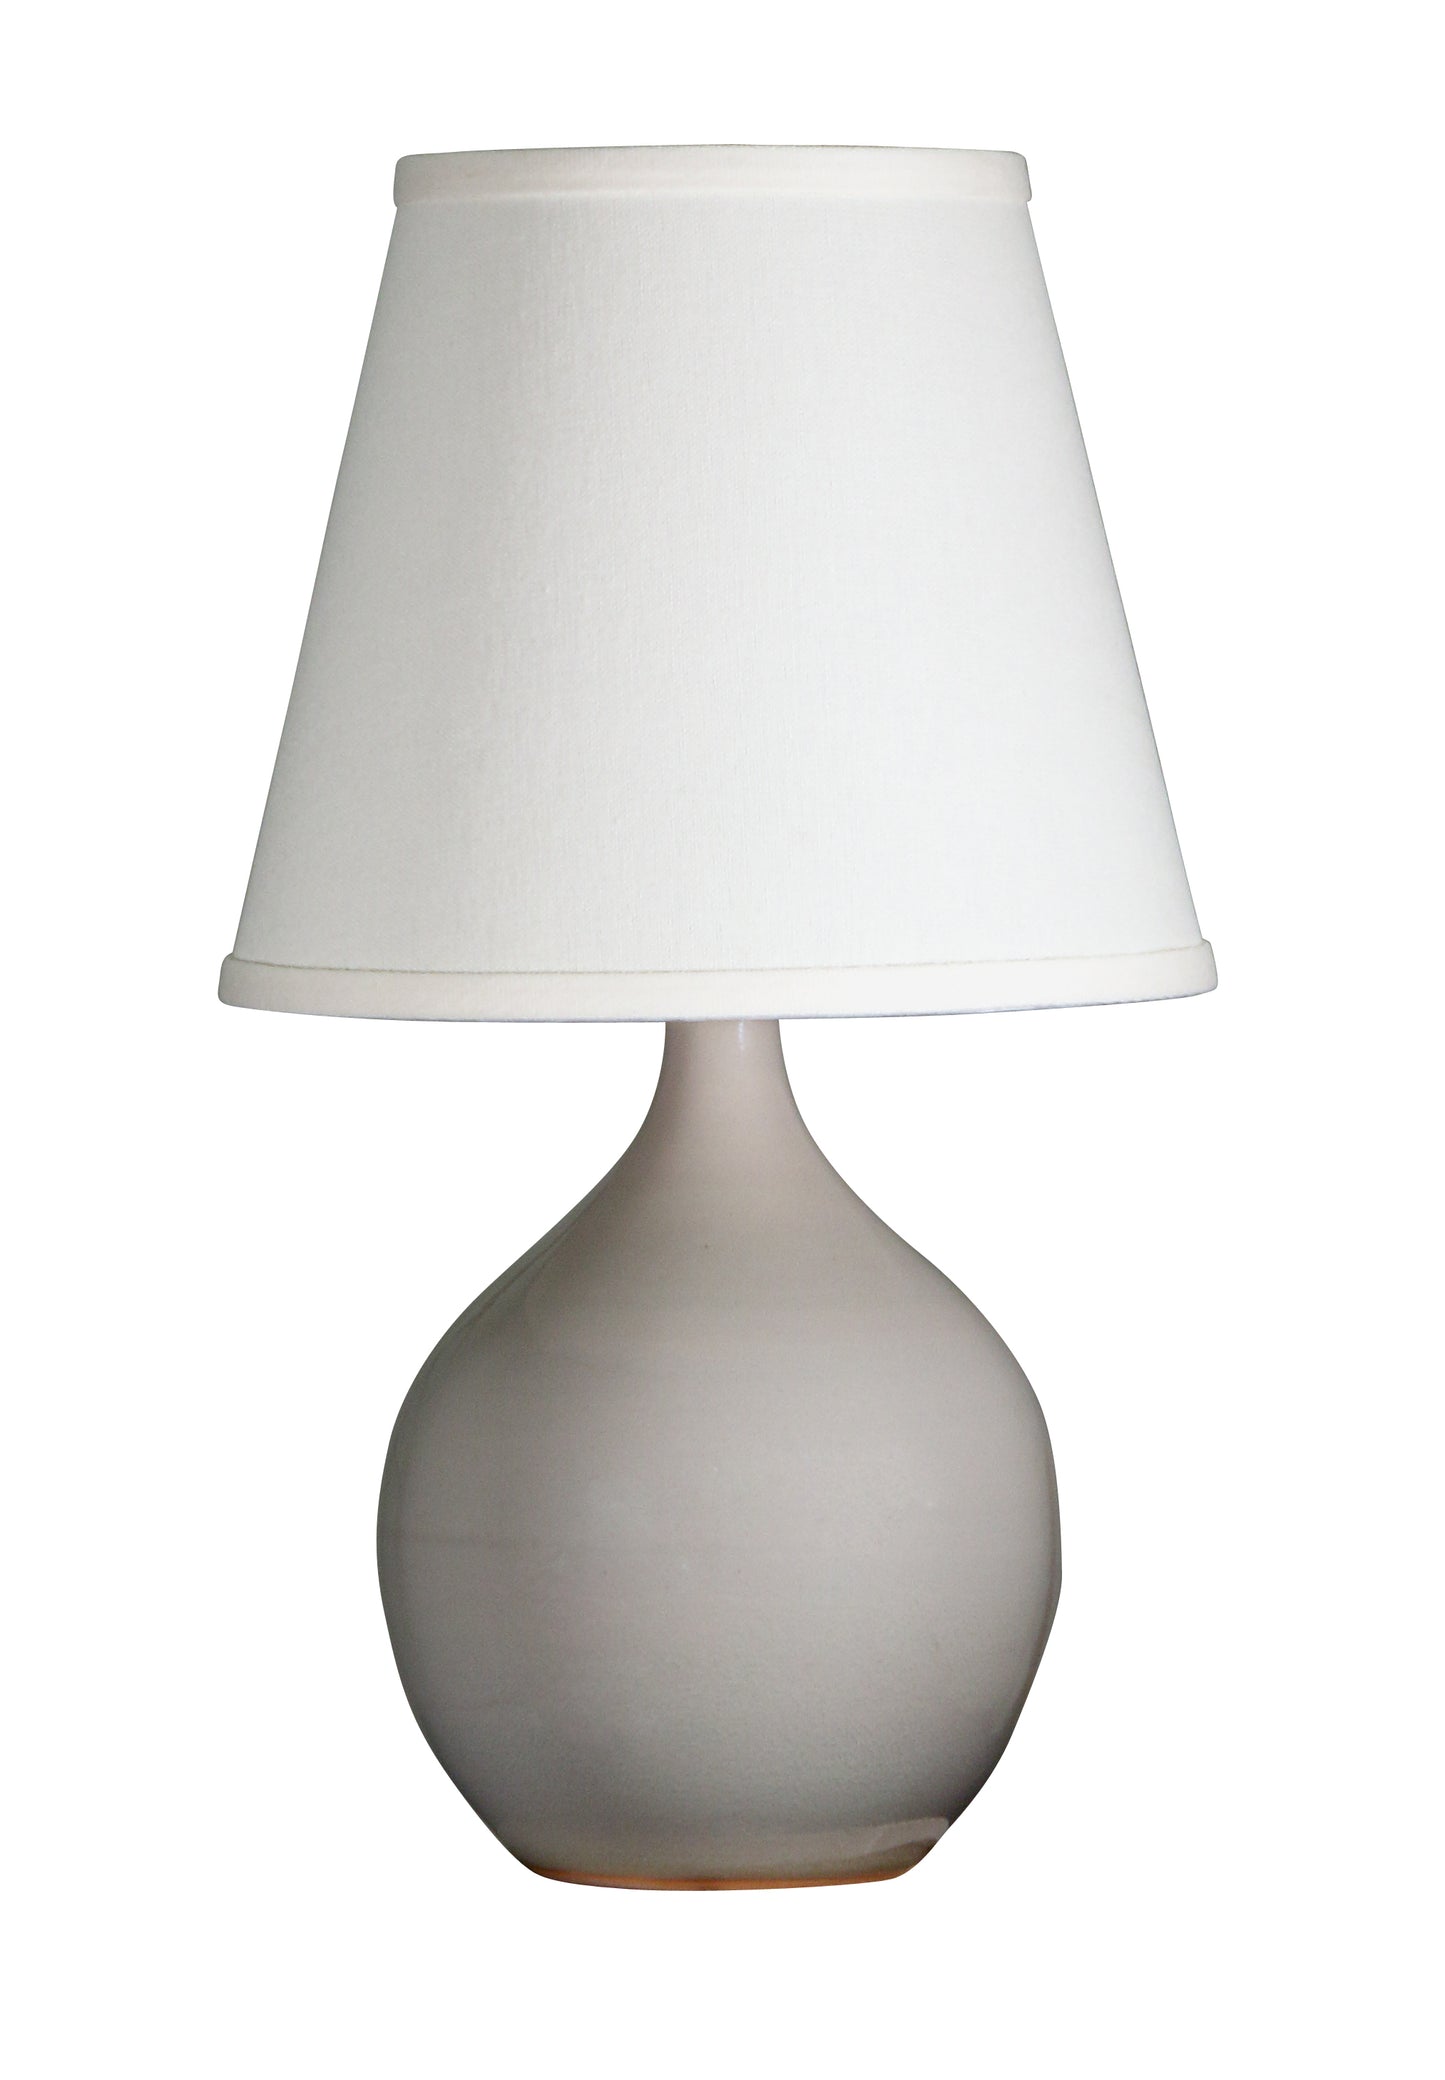 House of Troy Scatchard 13.5" Mini Accent Lamp in Gray Gloss GS50-GG